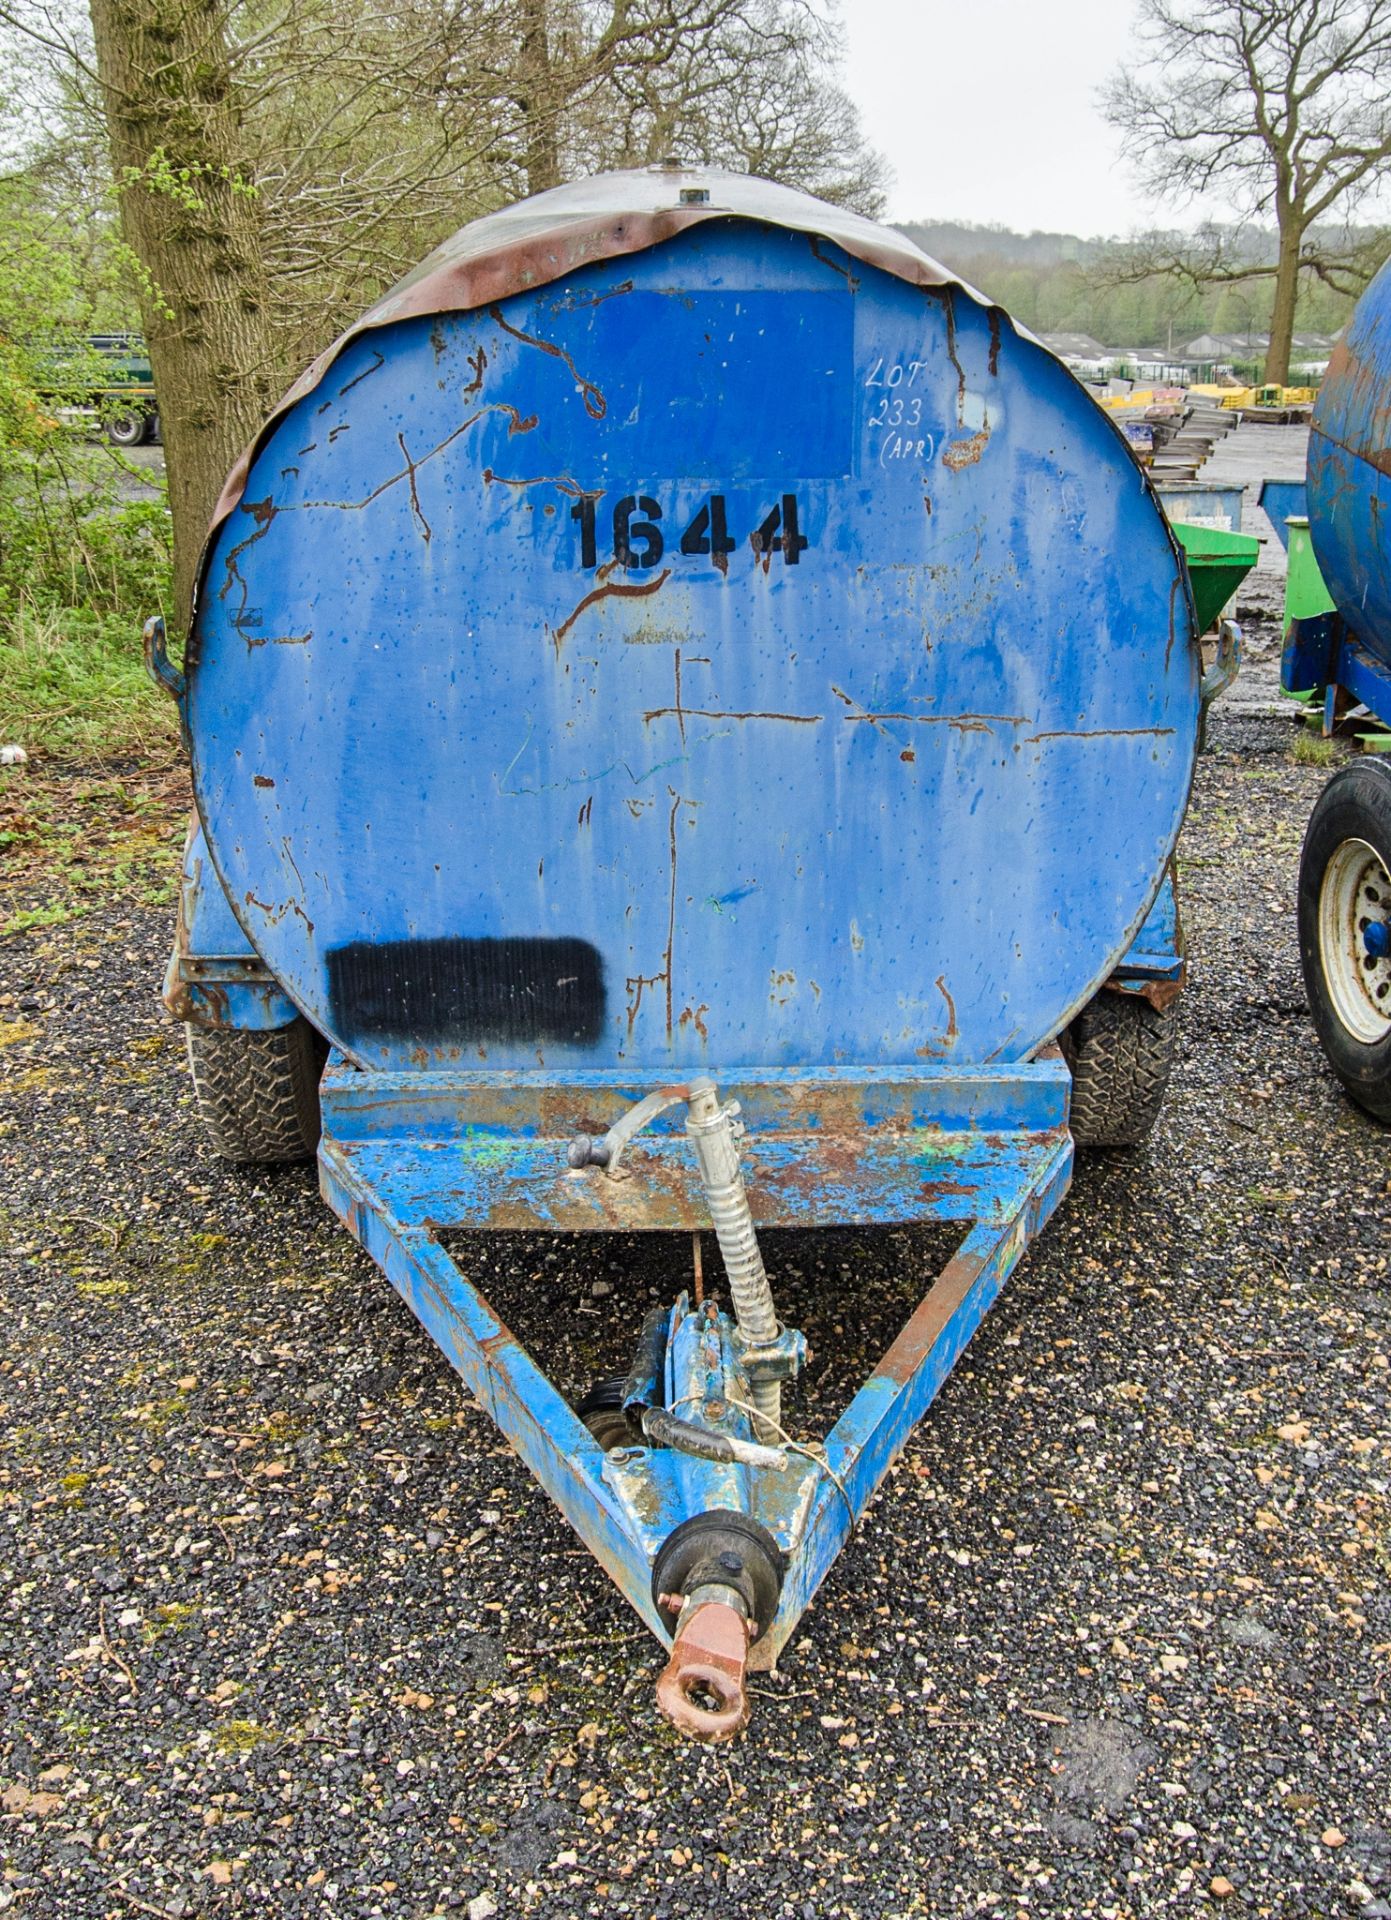 Trailer Engineering 2140 litre site tow bunded fuel bowser c/w manual pump, delivery hose & nozzle - Image 5 of 7